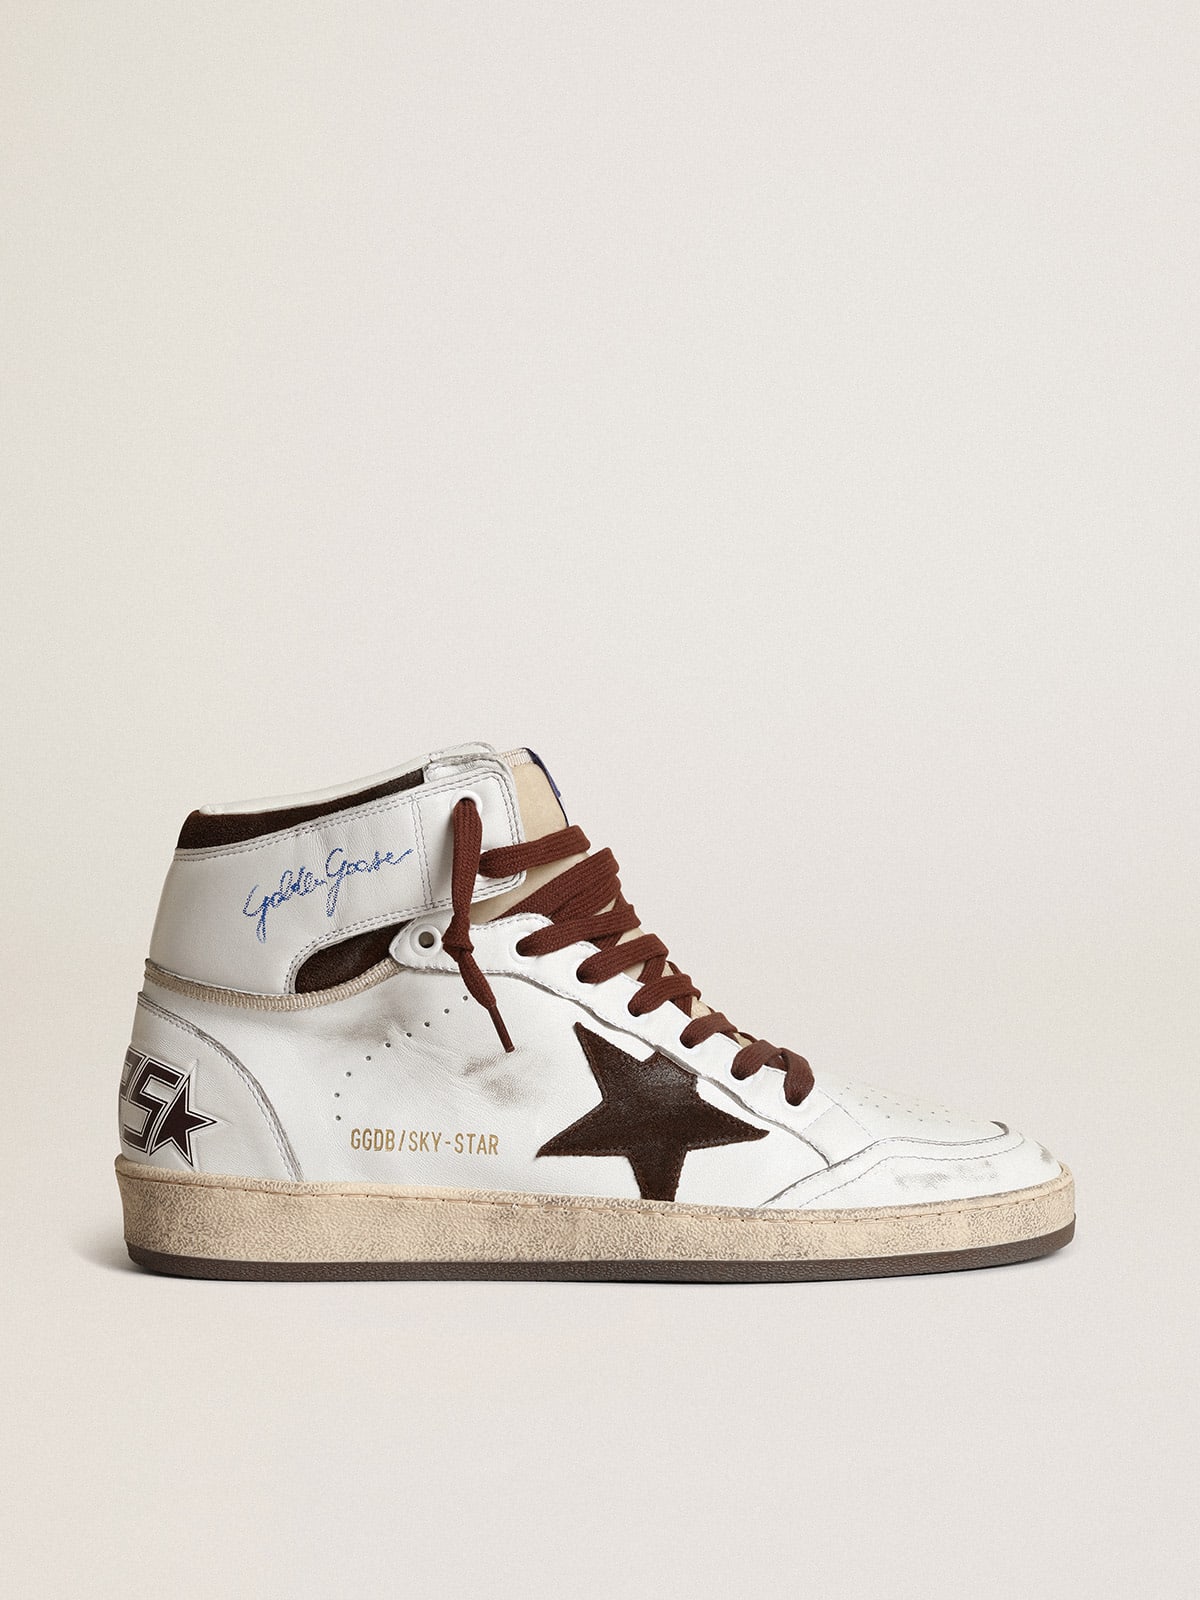 Men's Sky-Star in white nappa leather with a chocolate suede star